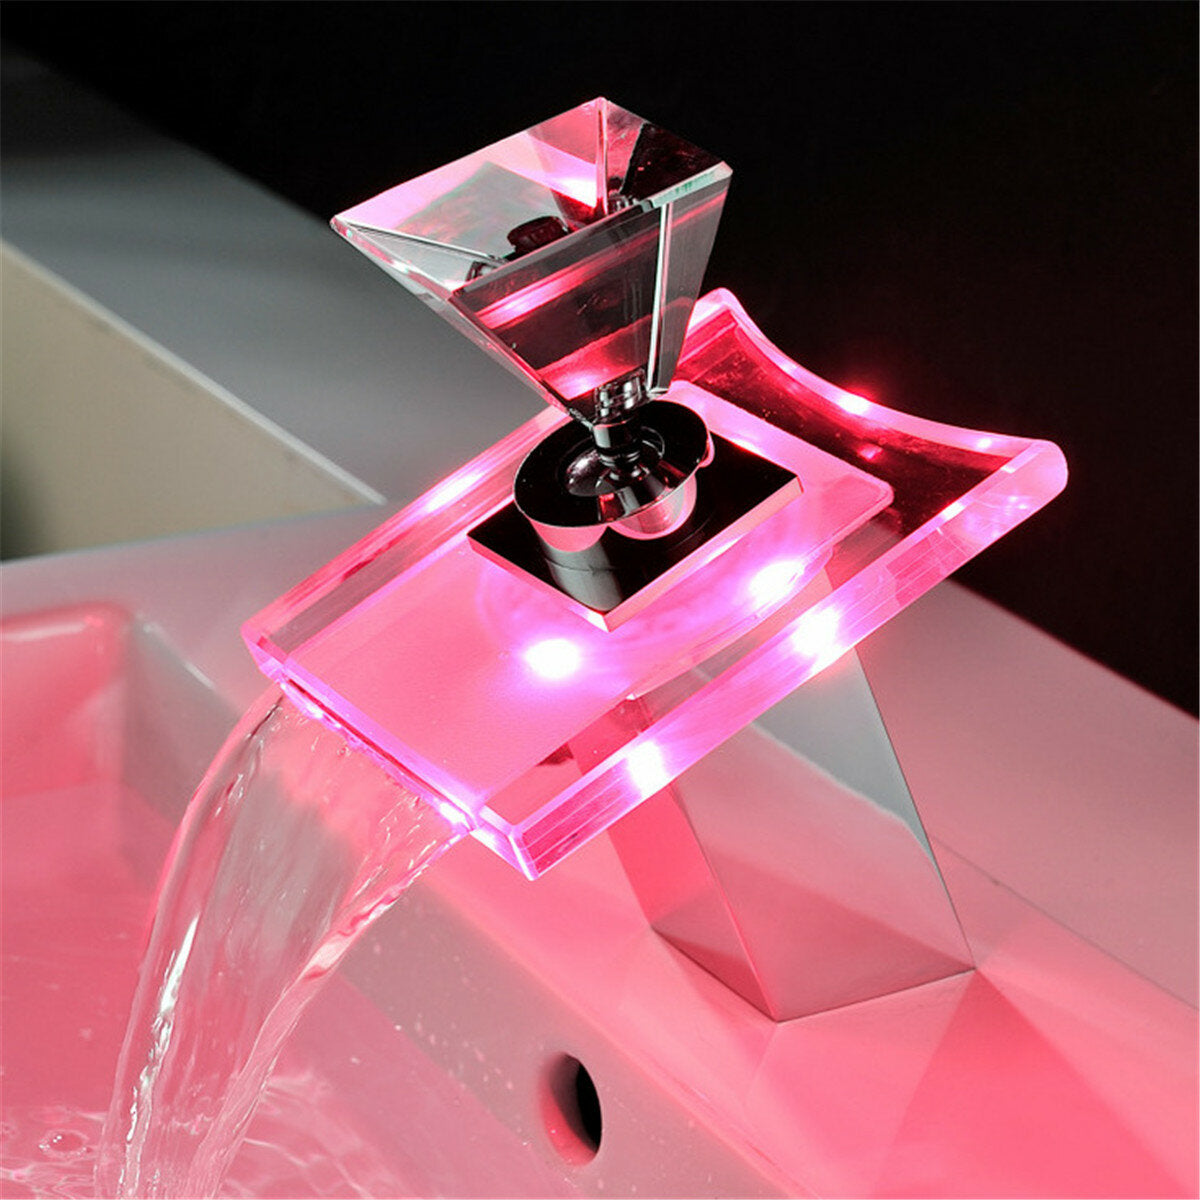 Color LED Changing Waterfall Faucet Bathroom Sink Glass Mixer TapColor LED Changing Waterfall Faucet Bathroom Sink Glass Mixer Tap